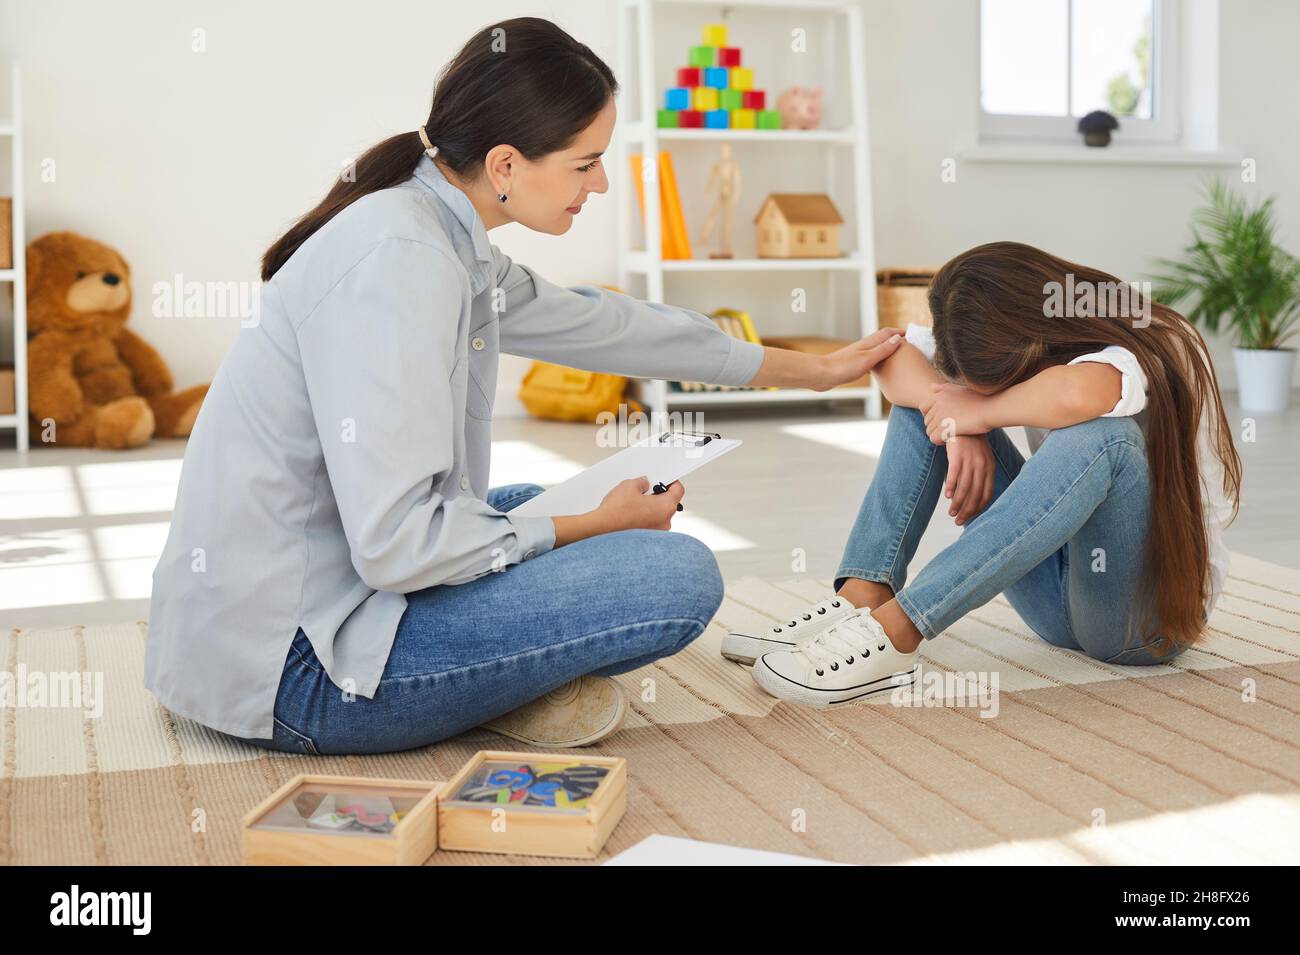 Specialist trying to help sad, stressed child to solve behaviour and learning problems Stock Photo